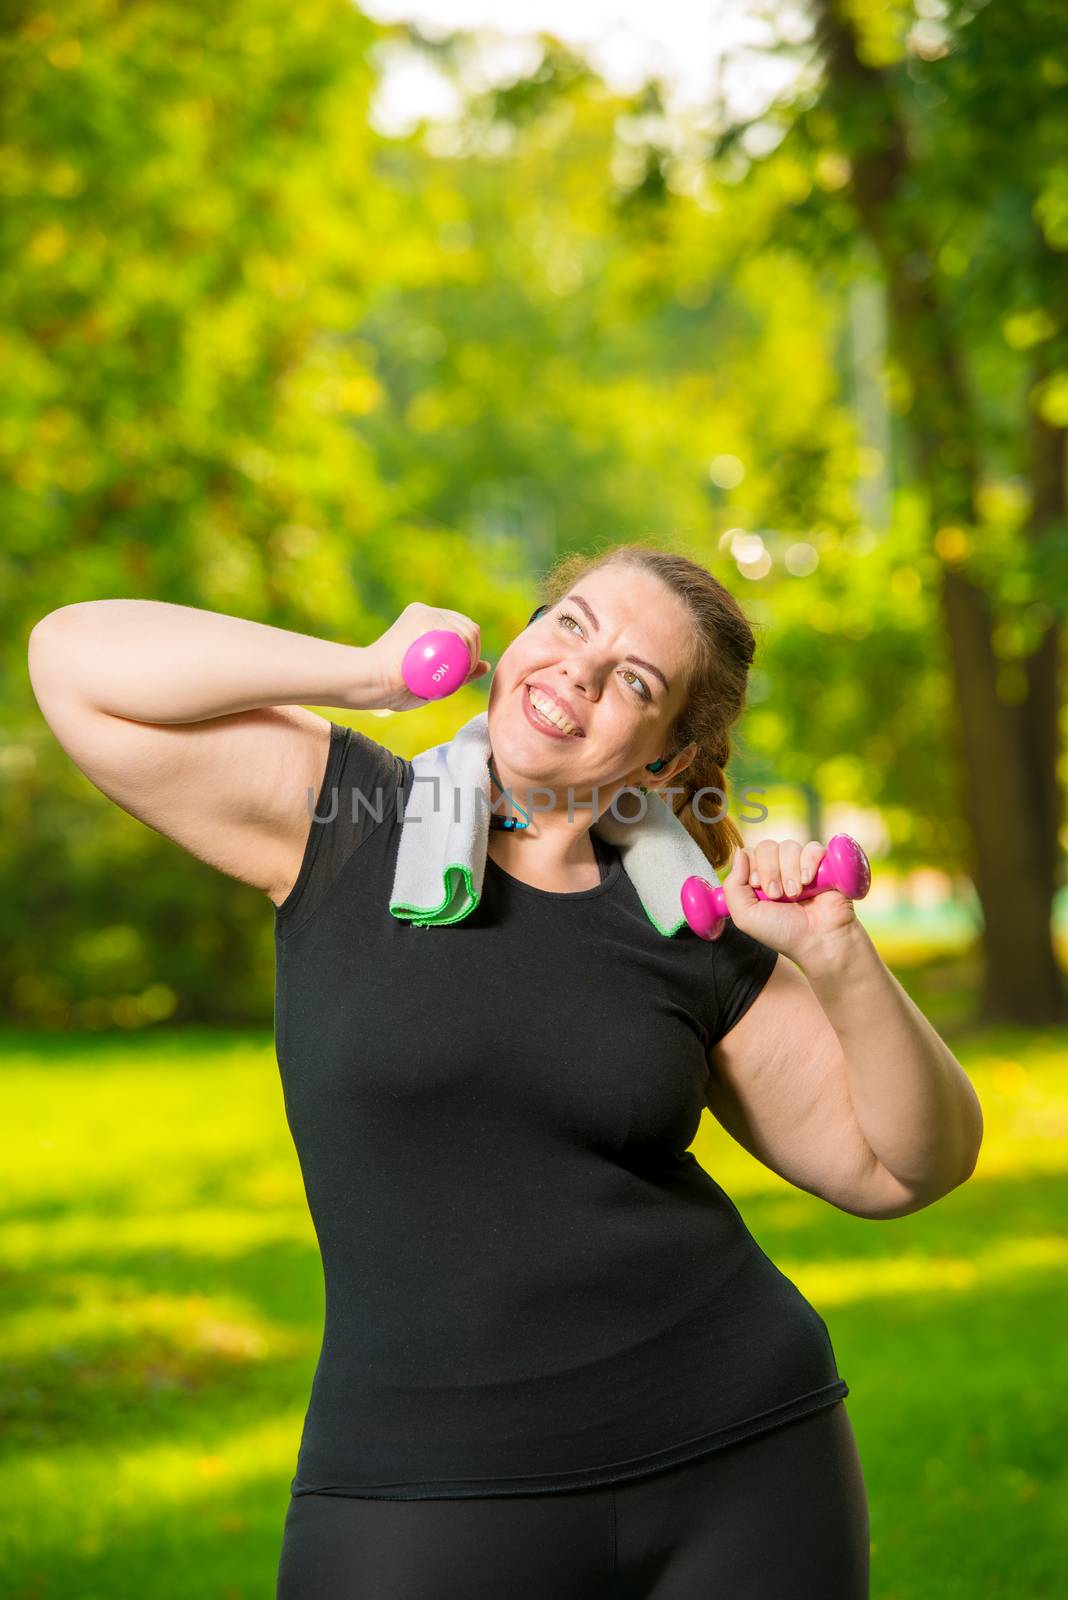 Vertical portrait of a happy plus-size model with dumbbells during a workout in a summer park